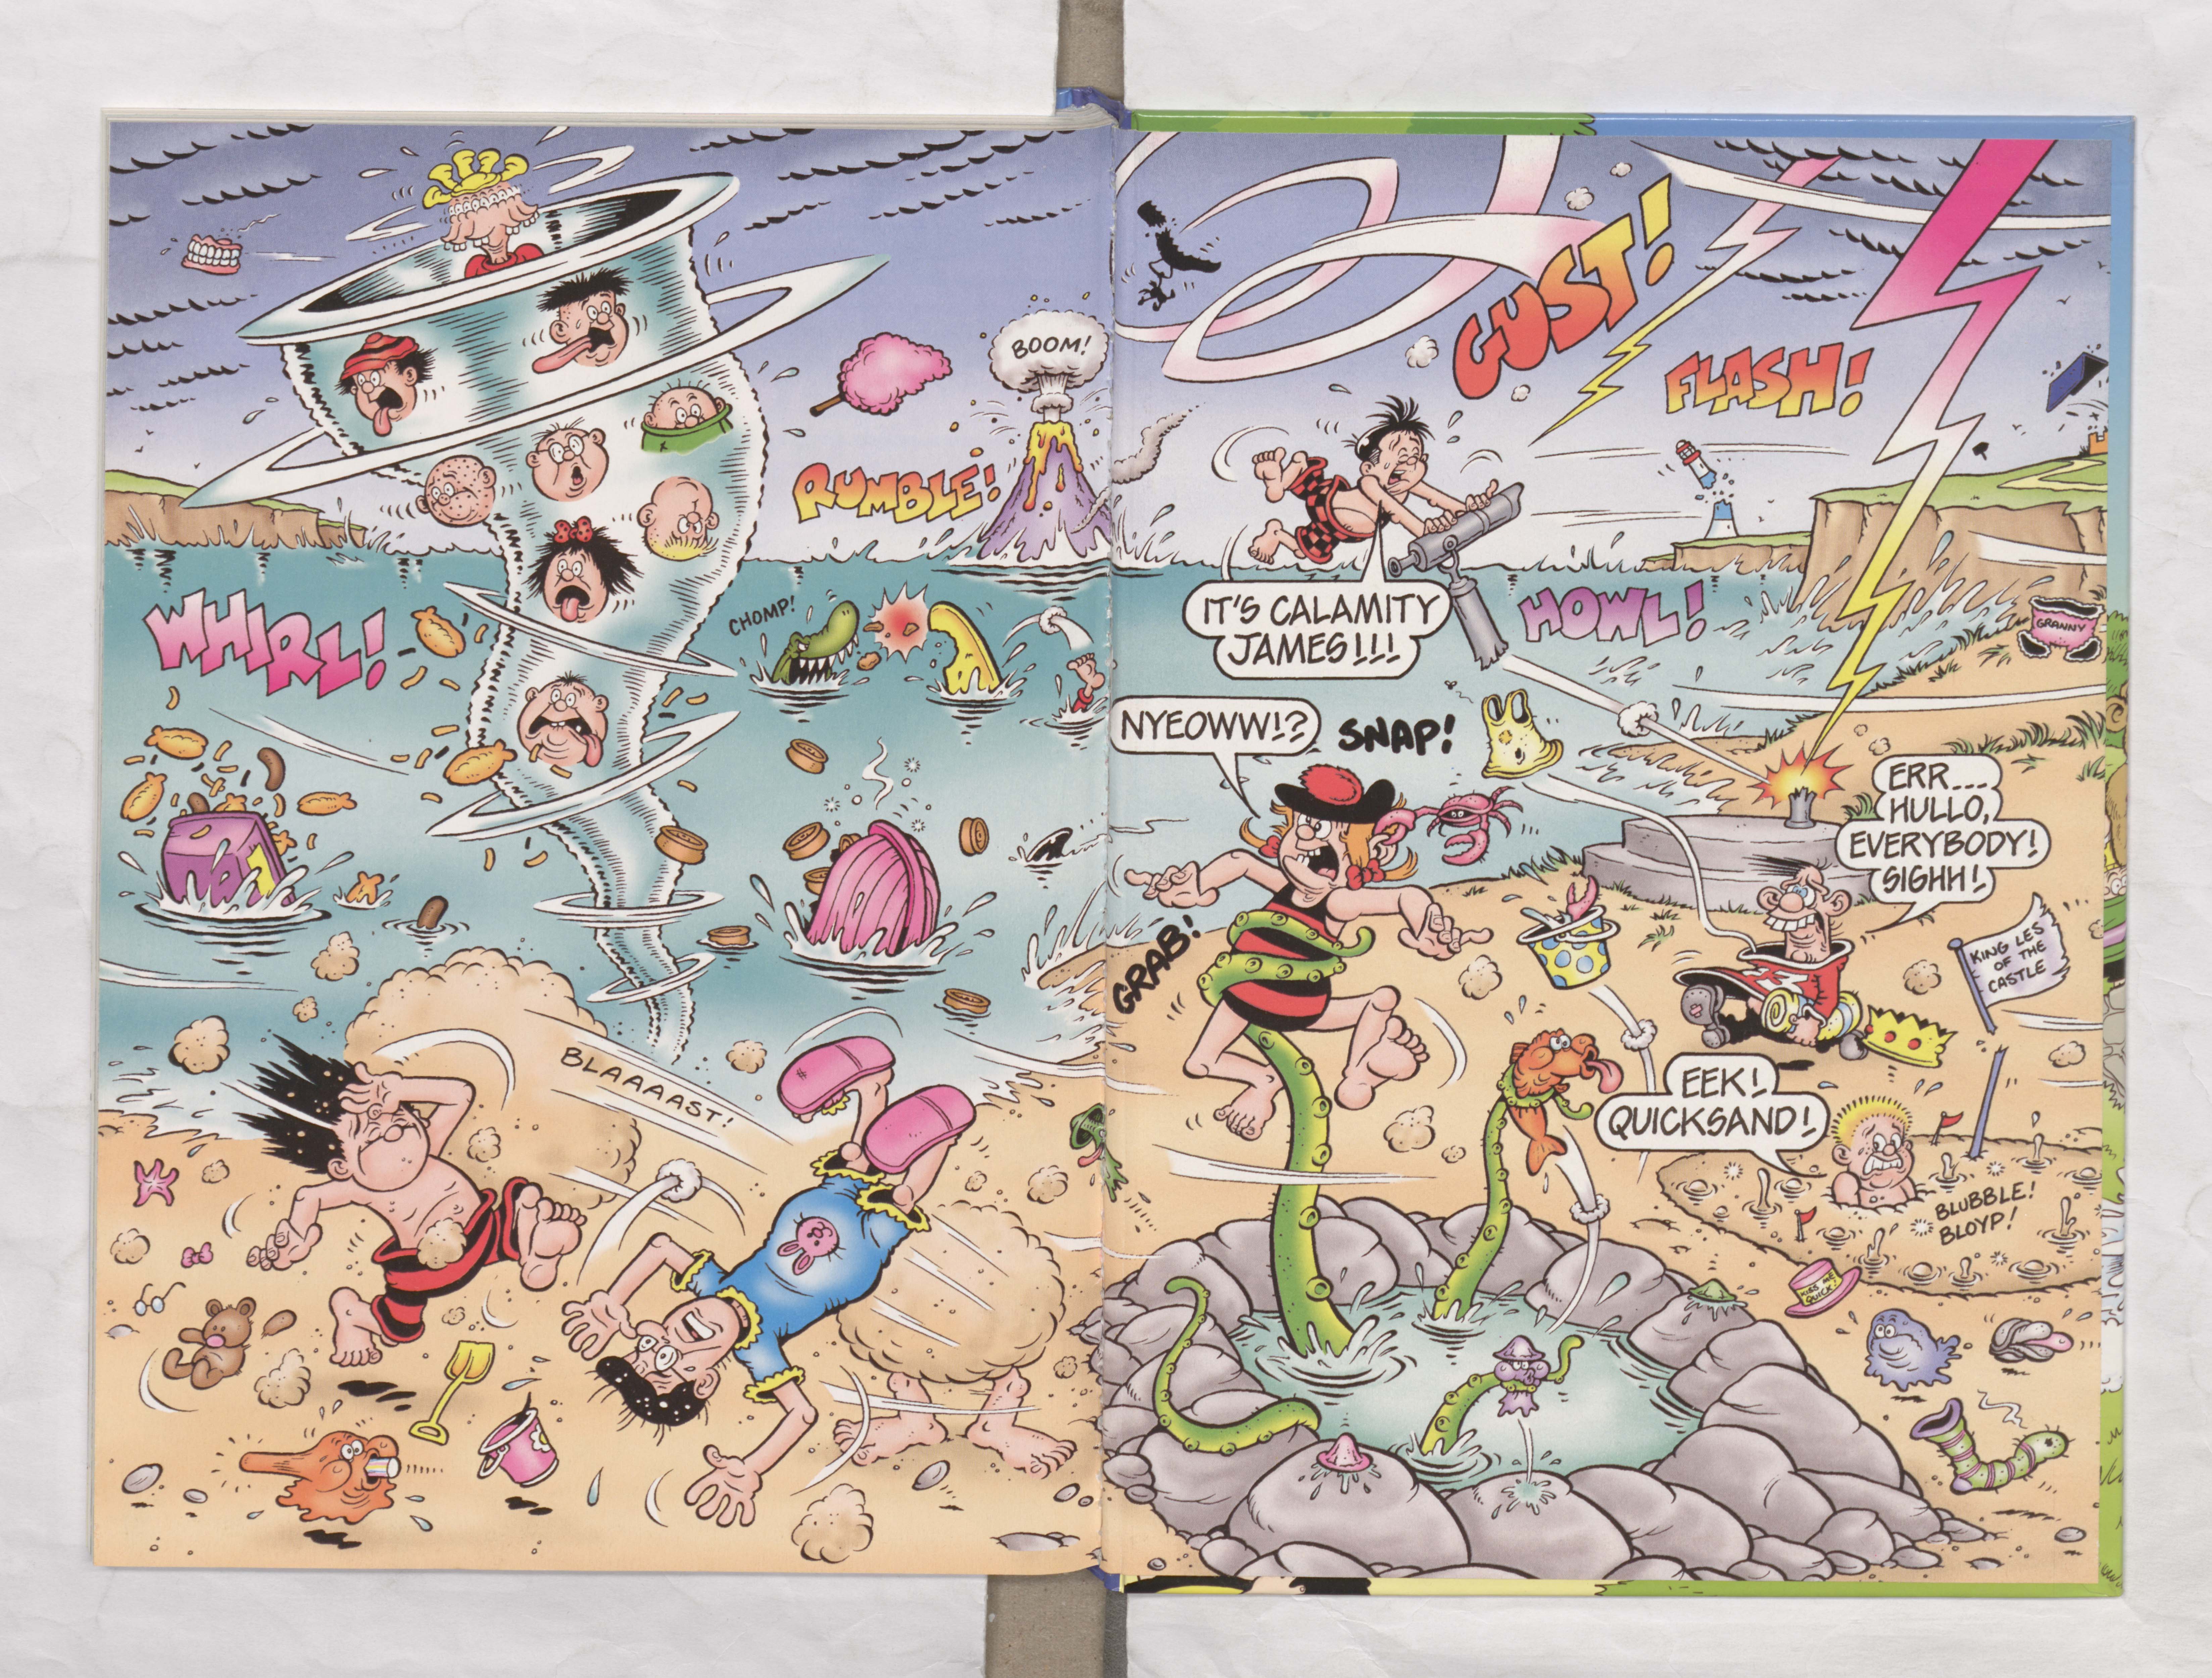 Spot the Difference at Beanotown Beach - Beano Annual 2005